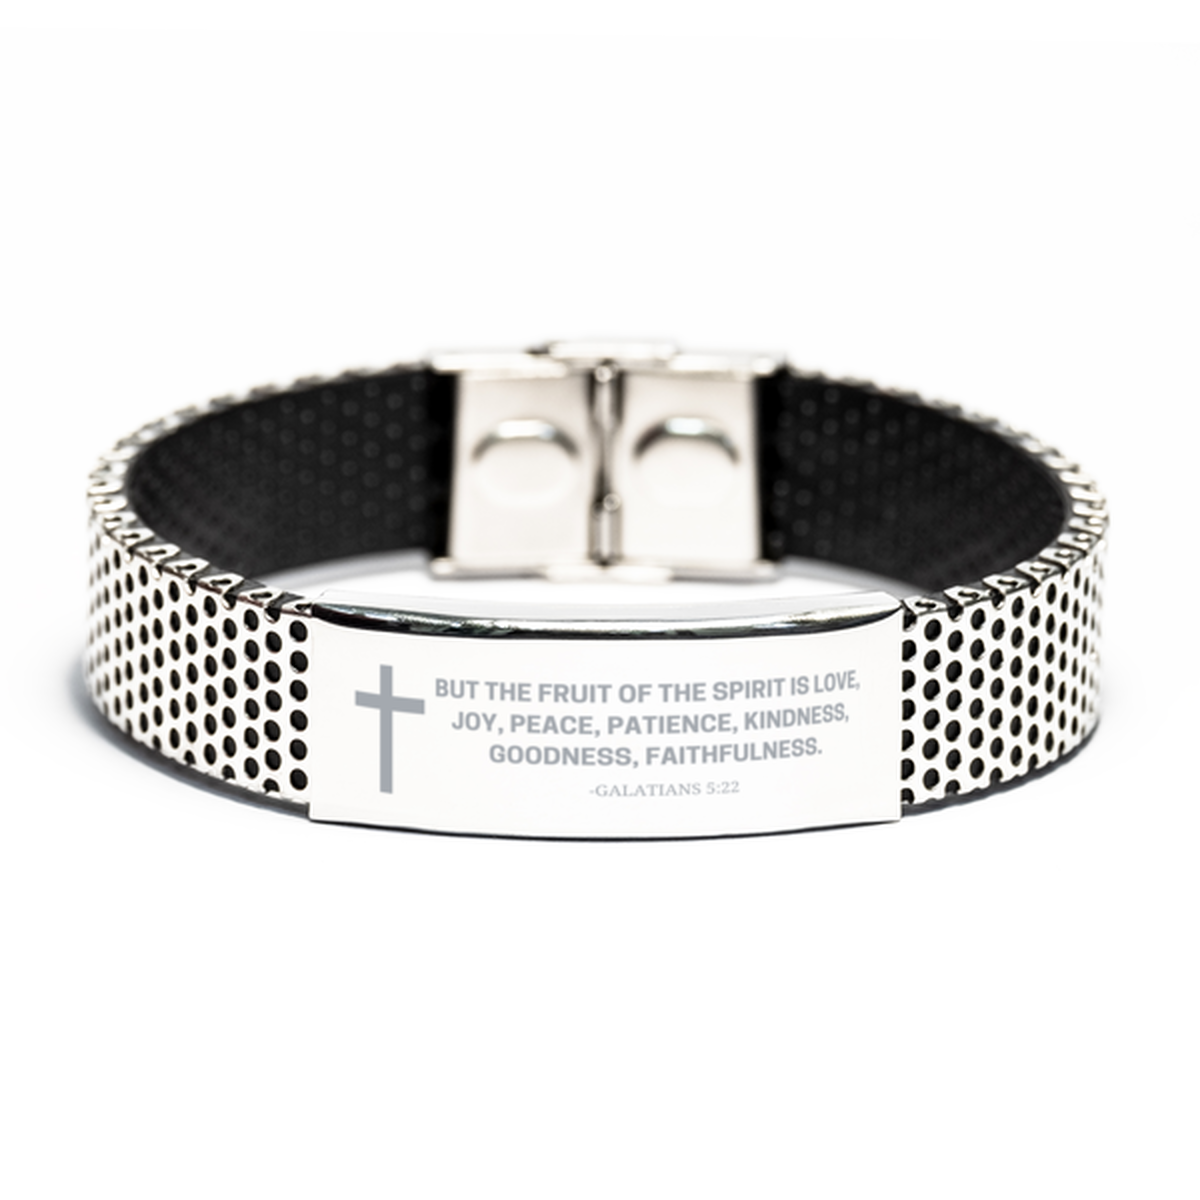 Baptism Gifts For Teenage Boys Girls, Christian Bible Verse Stainless Steel Bracelet, But the fruit of the Spirit, Catholic Confirmation Gifts for Son, Godson, Grandson, Nephew